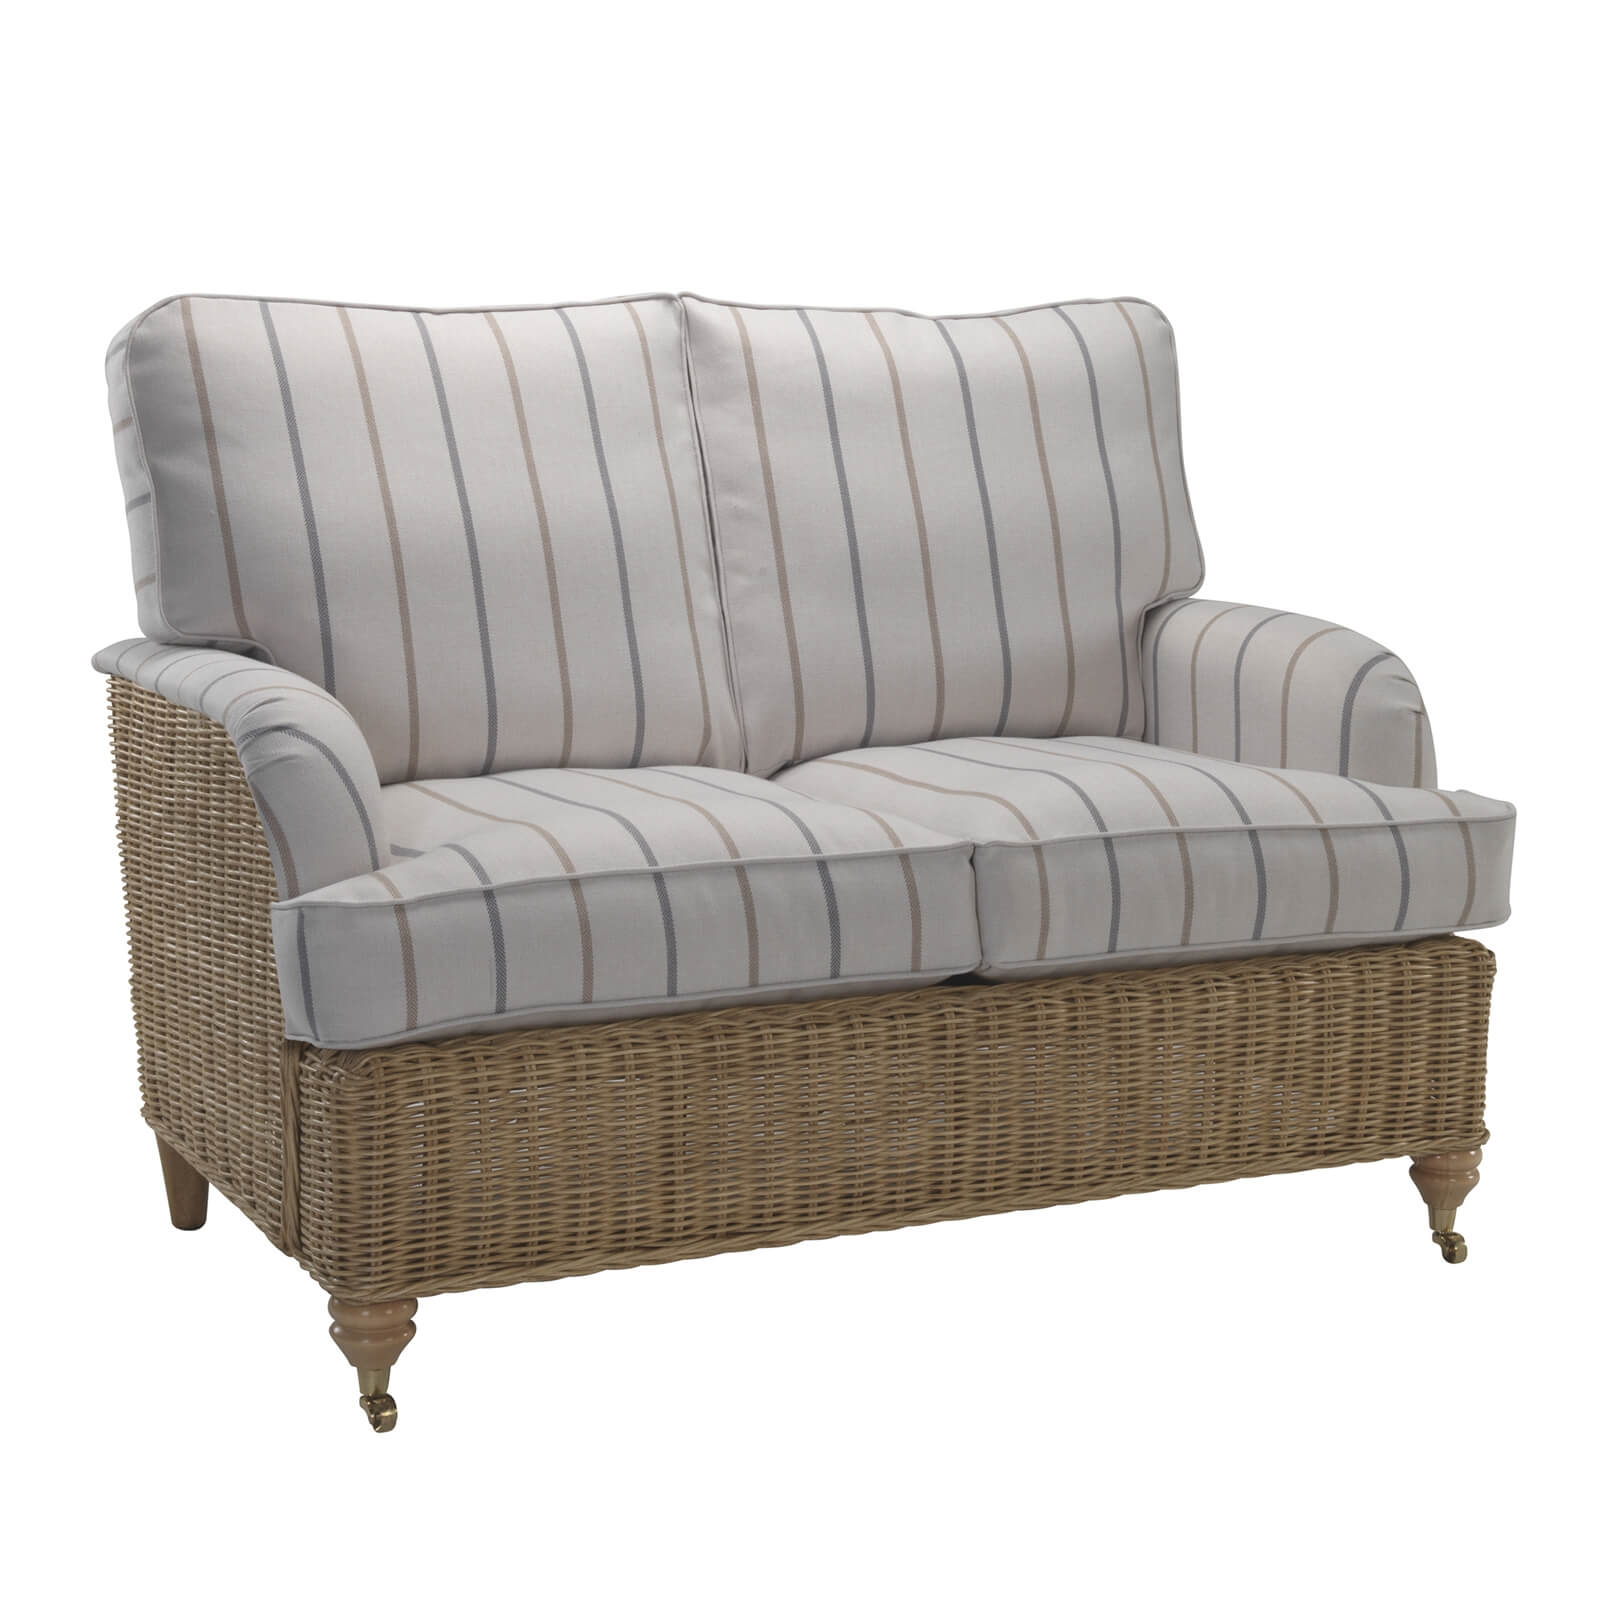 Seville 2 Seater Sofa In Linen Taupe